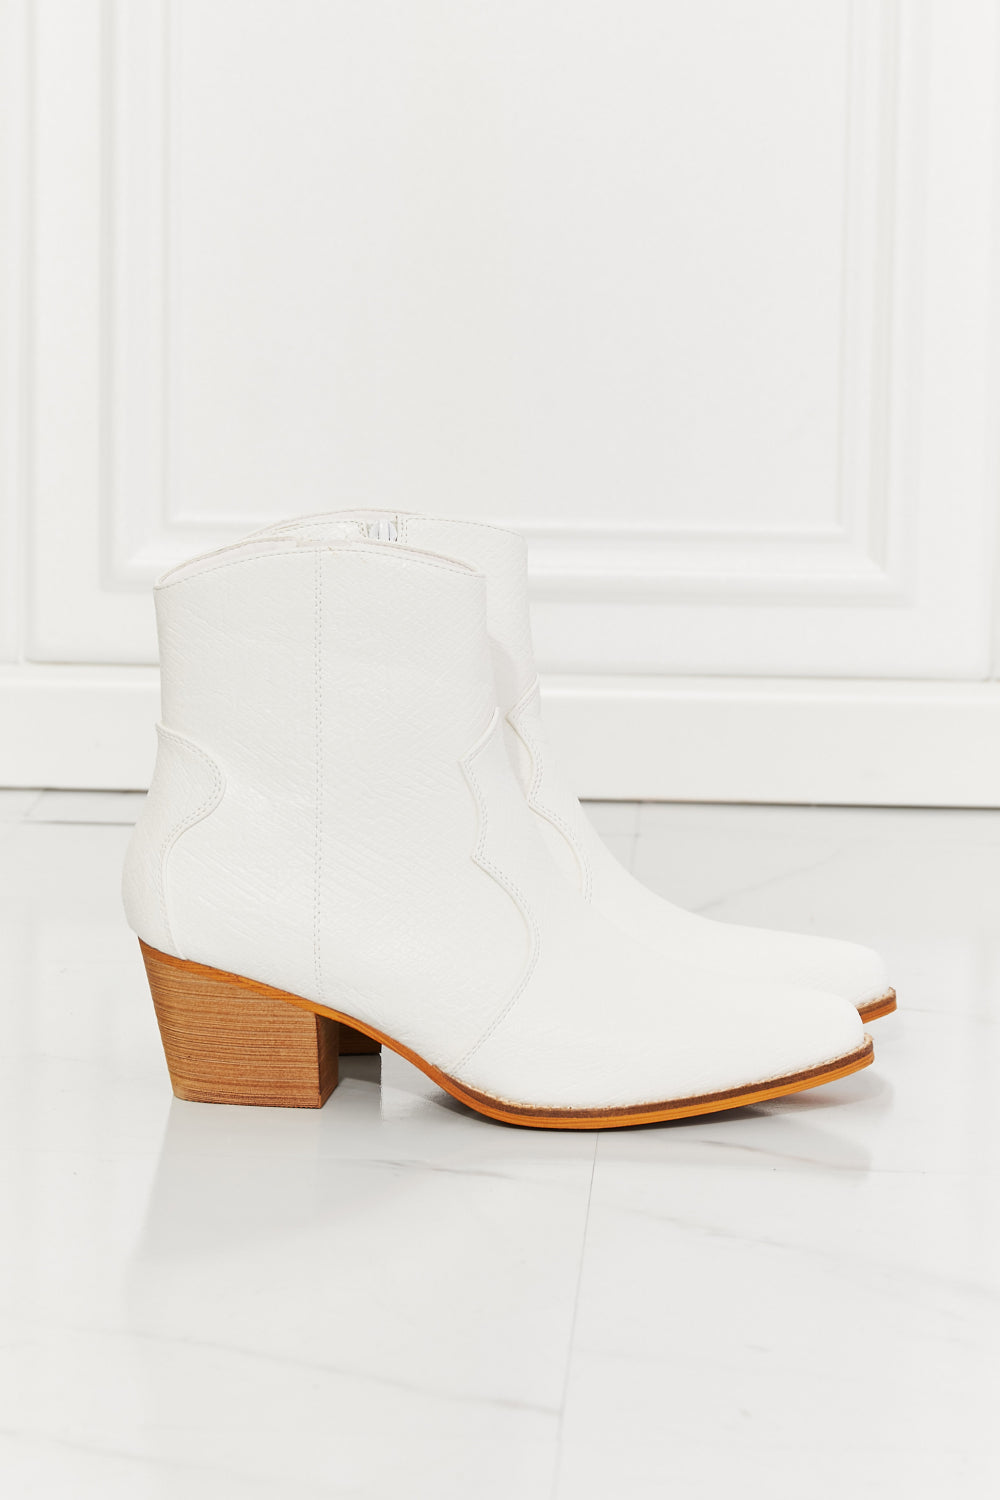 MMShoes Watertower Town Faux Leather Western Ankle Boots in White - BEAUTY COSMOTICS SHOP